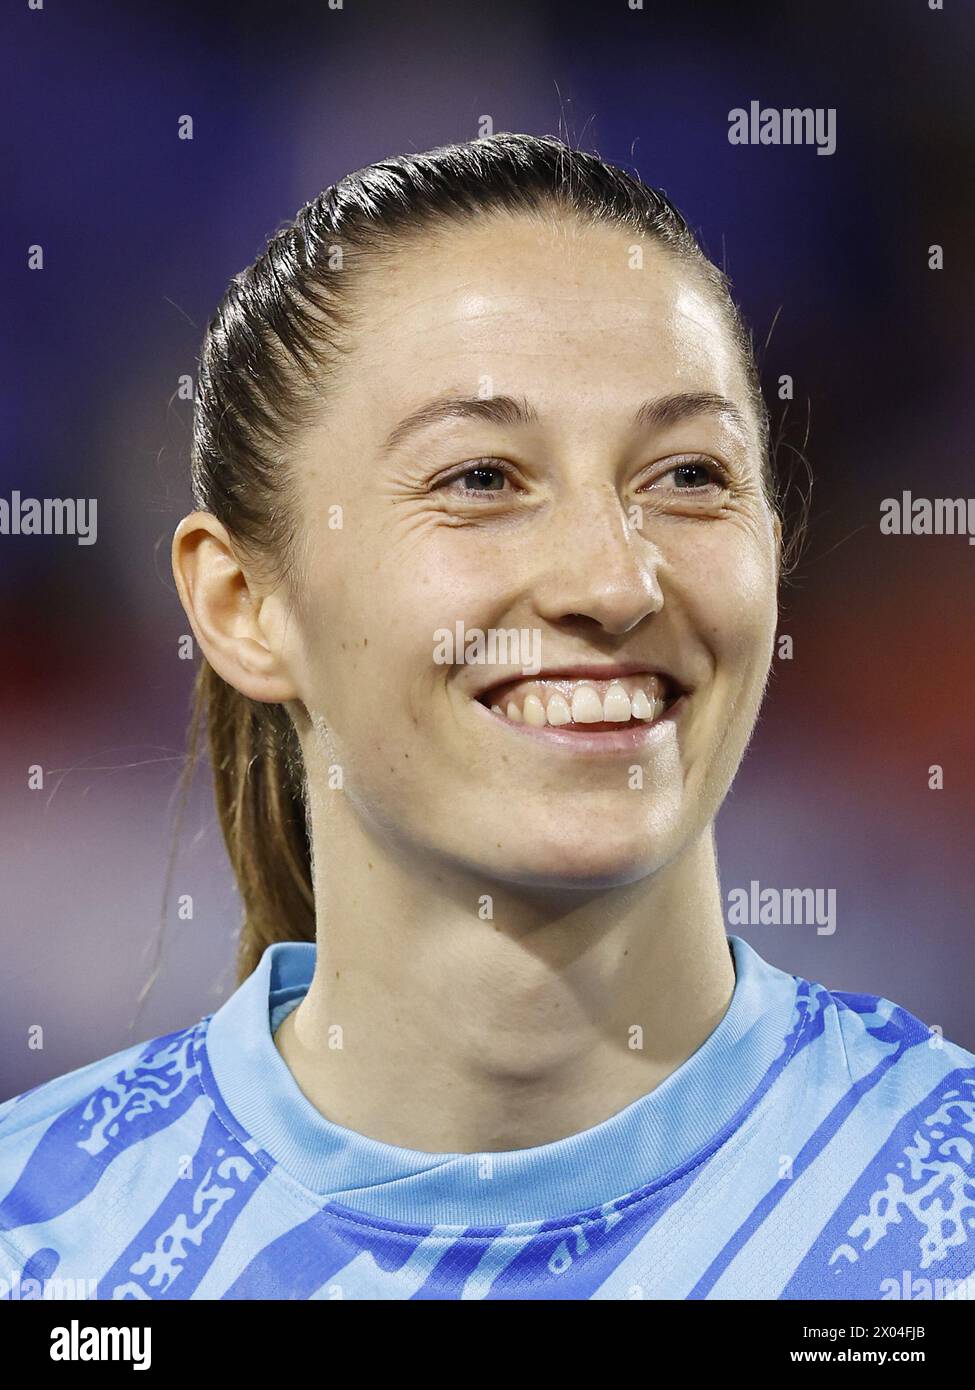 BREDA - Norway women goalkeeper Cecilie Fiskerstrand during the European Championship qualifying match for women in group A1 between the Netherlands and Norway at the Rat Verlegh stadium on April 9, 2024 in Breda, the Netherlands. ANP | Hollandse Hoogte | MAURICE VAN STEEN Stock Photo